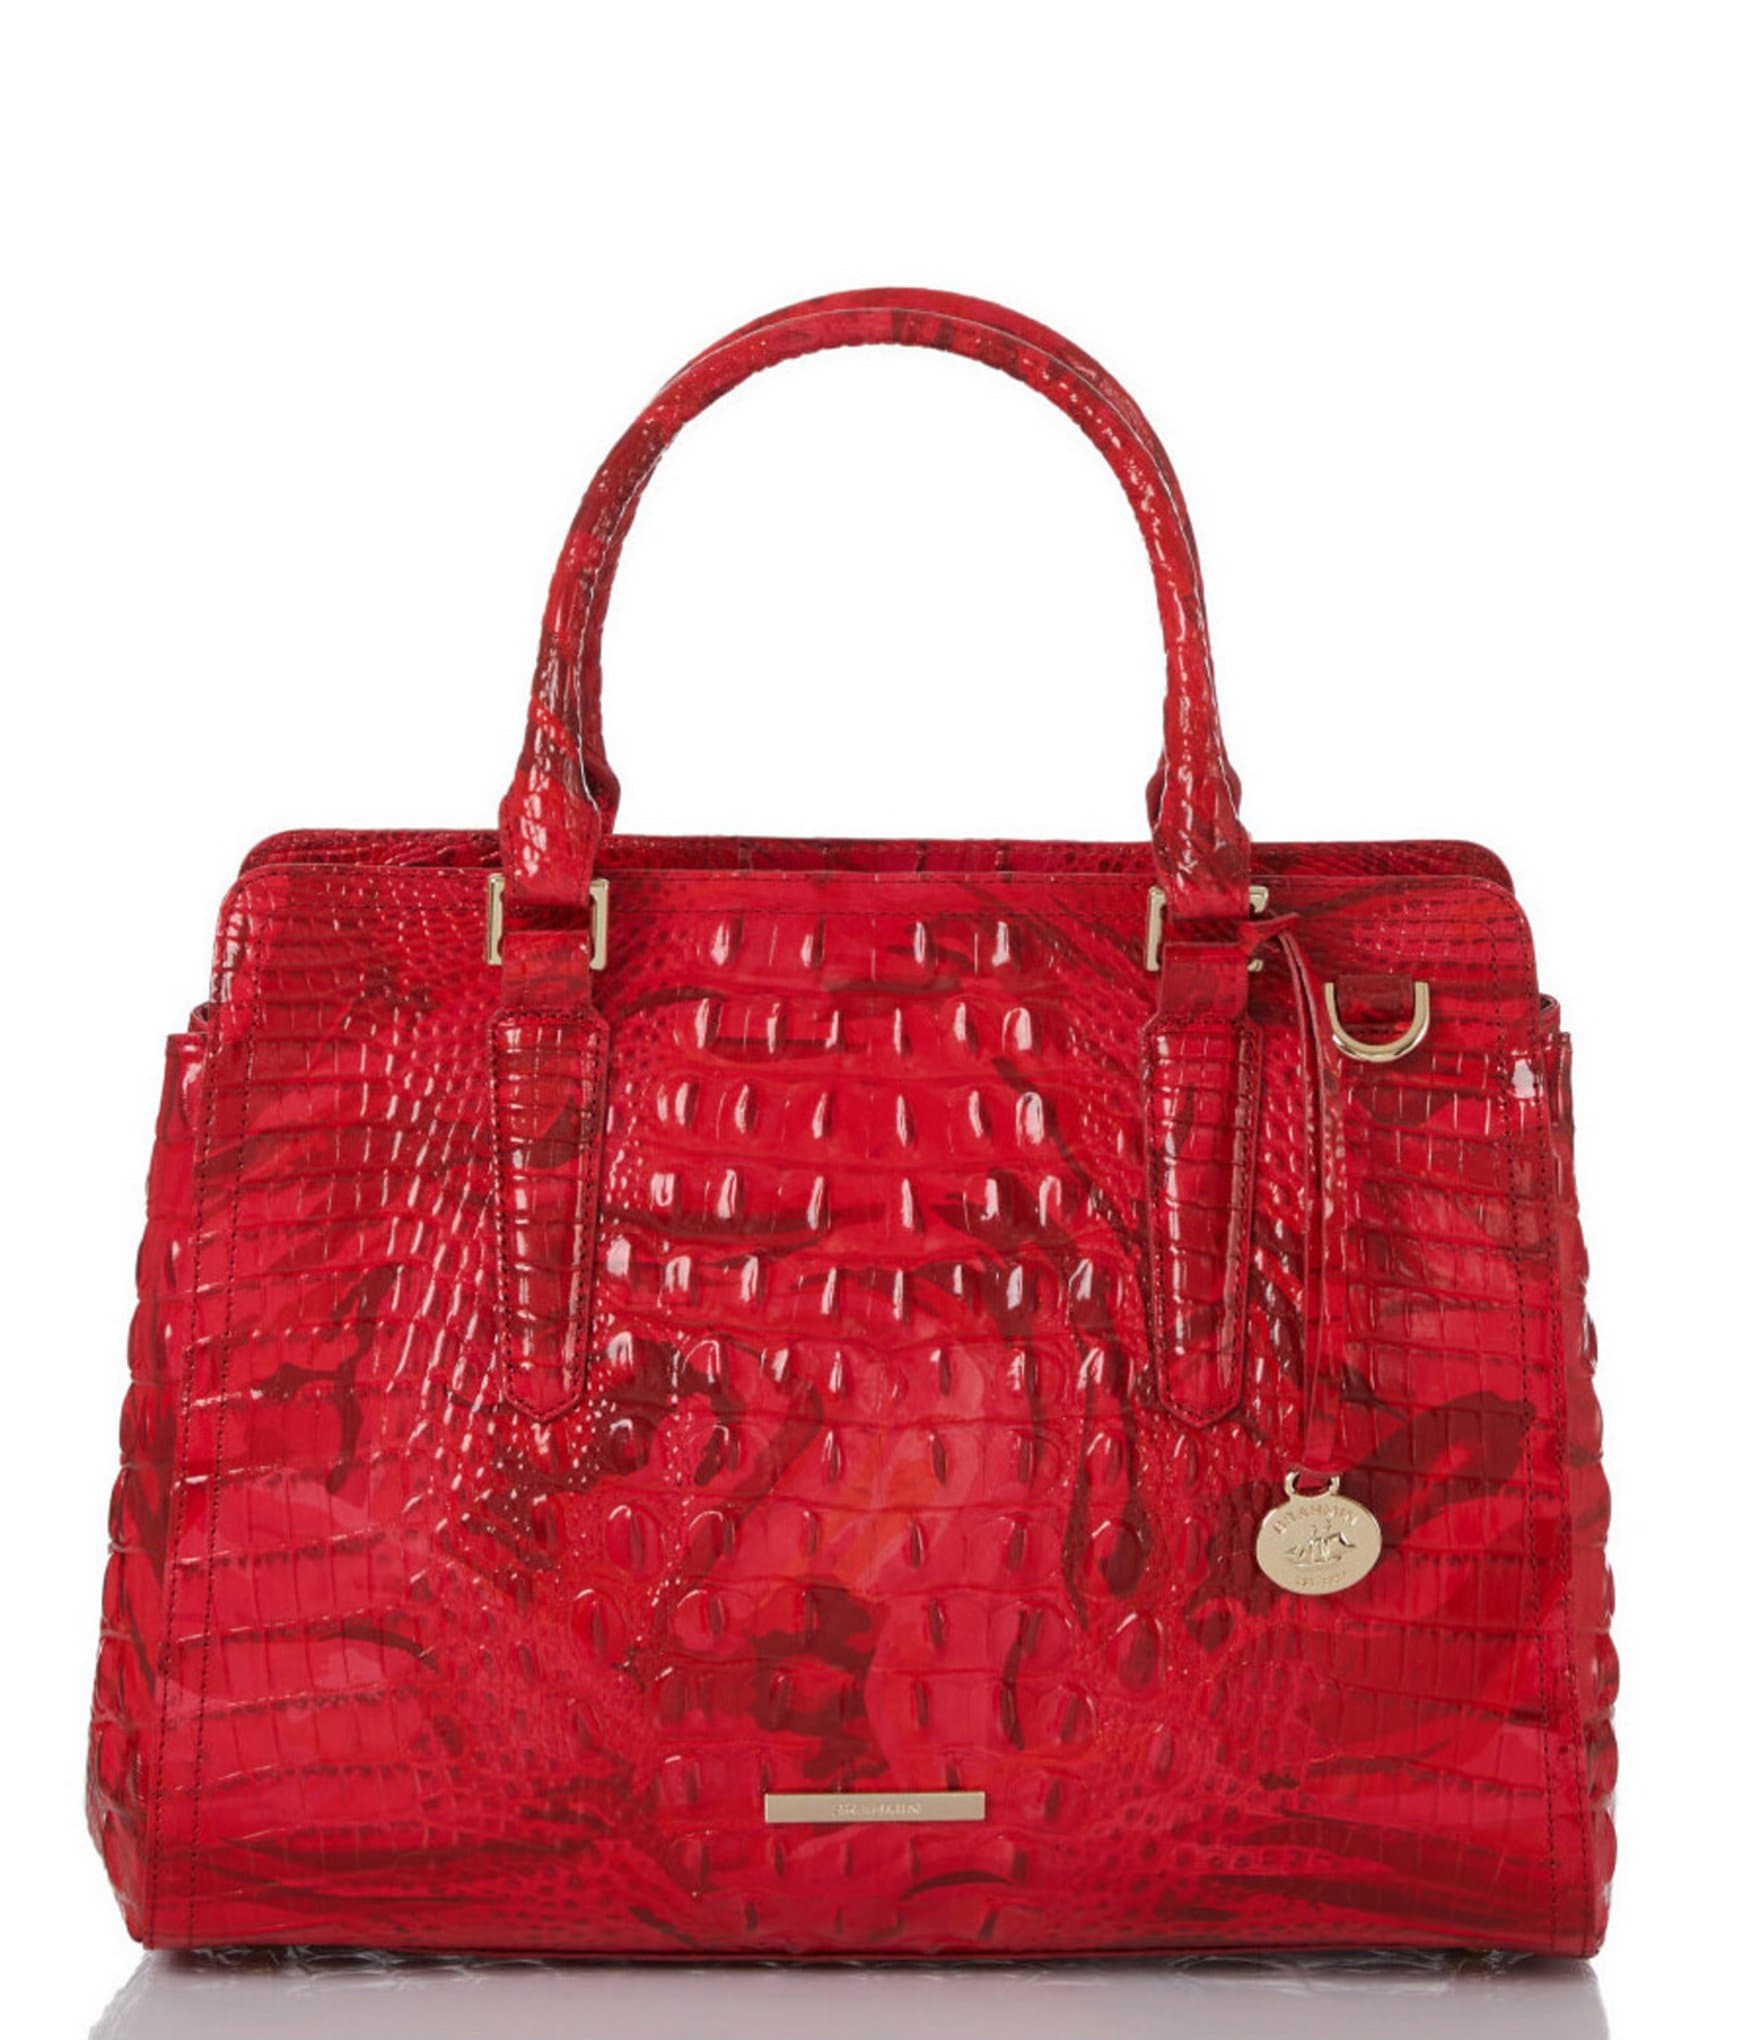 BRAHMIN Woven Straw Wicker & Red Croc-Embossed Leather Shoulder Bag Purse  USA